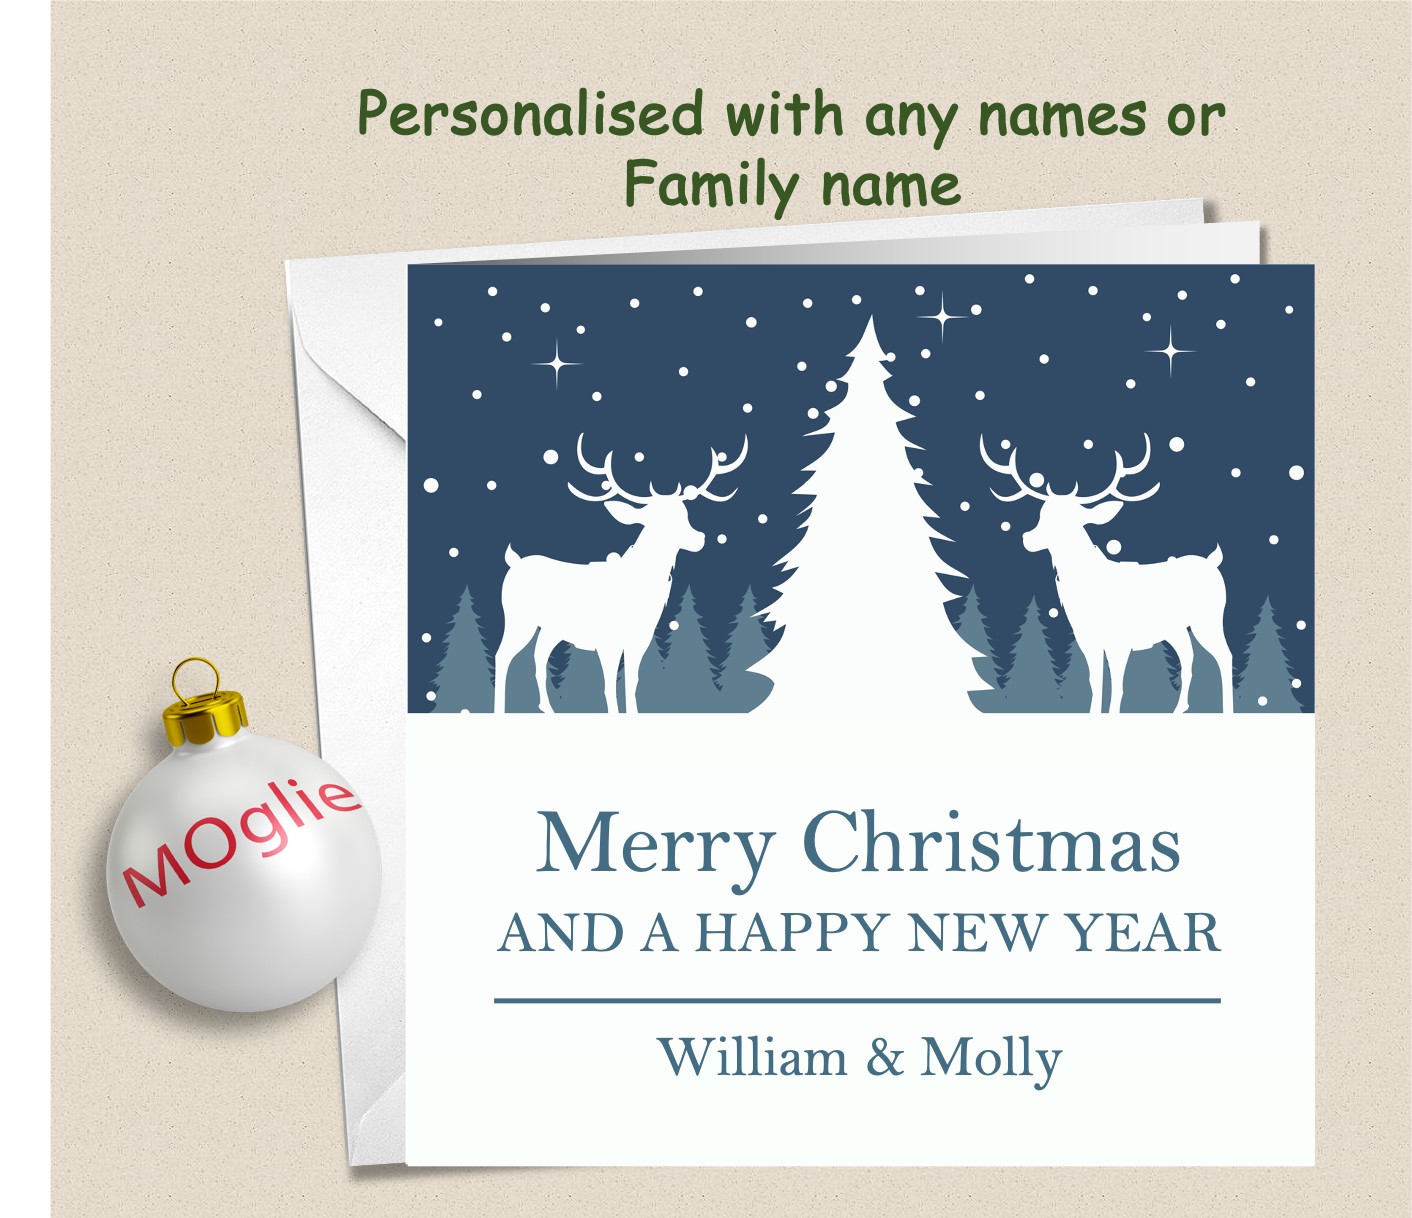 Personalised Christmas Xmas card with any family name, club, work or business - GEN7